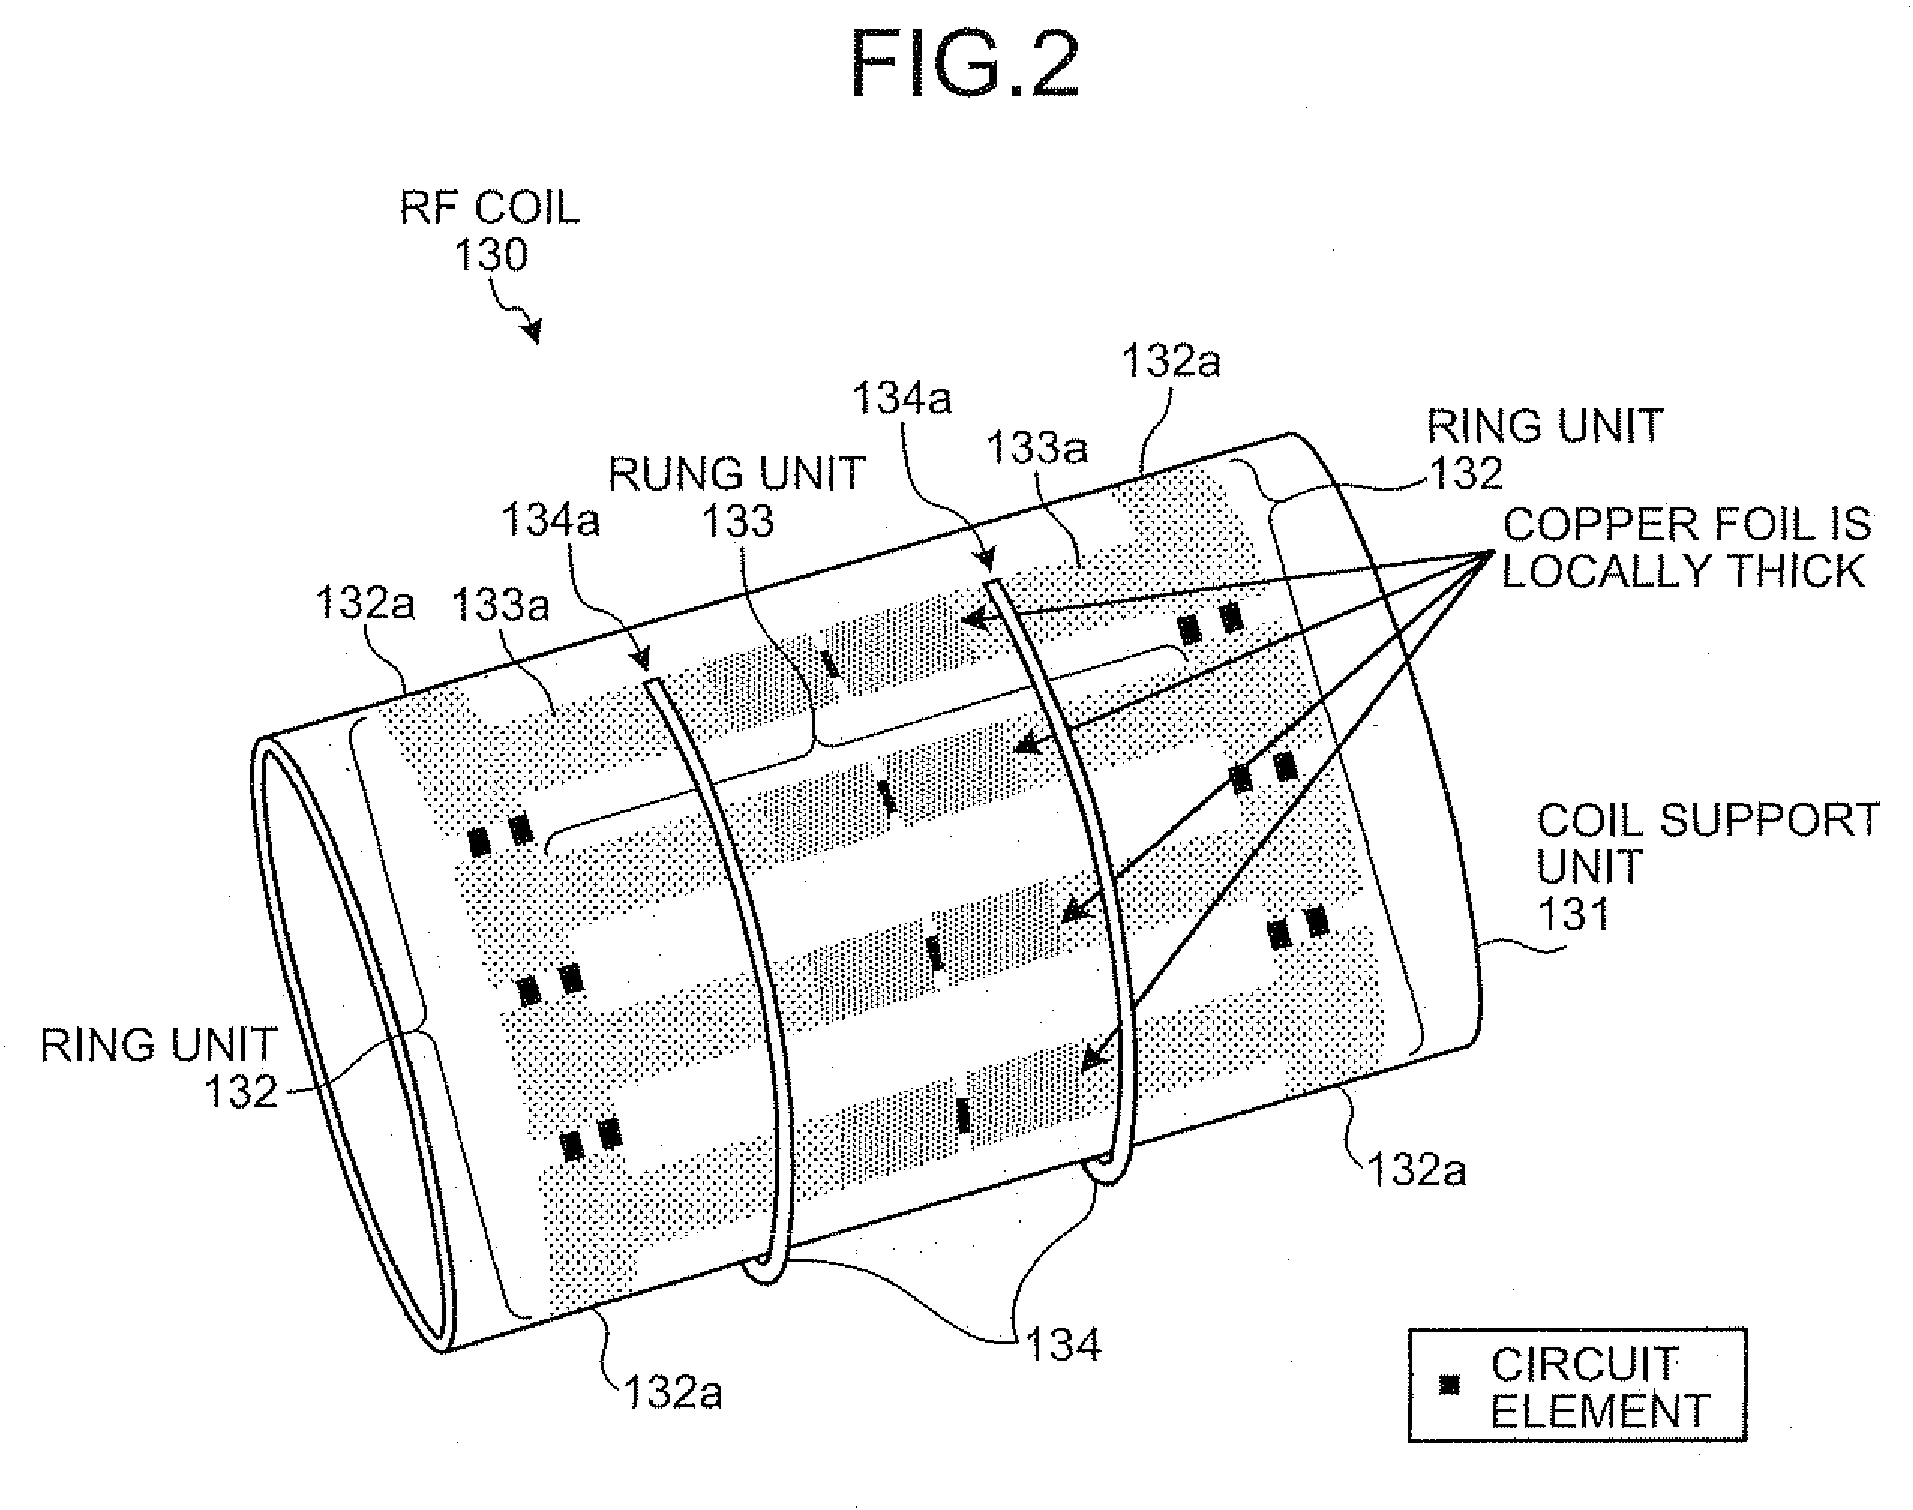 Magnetic resonance imaging system and RF coil